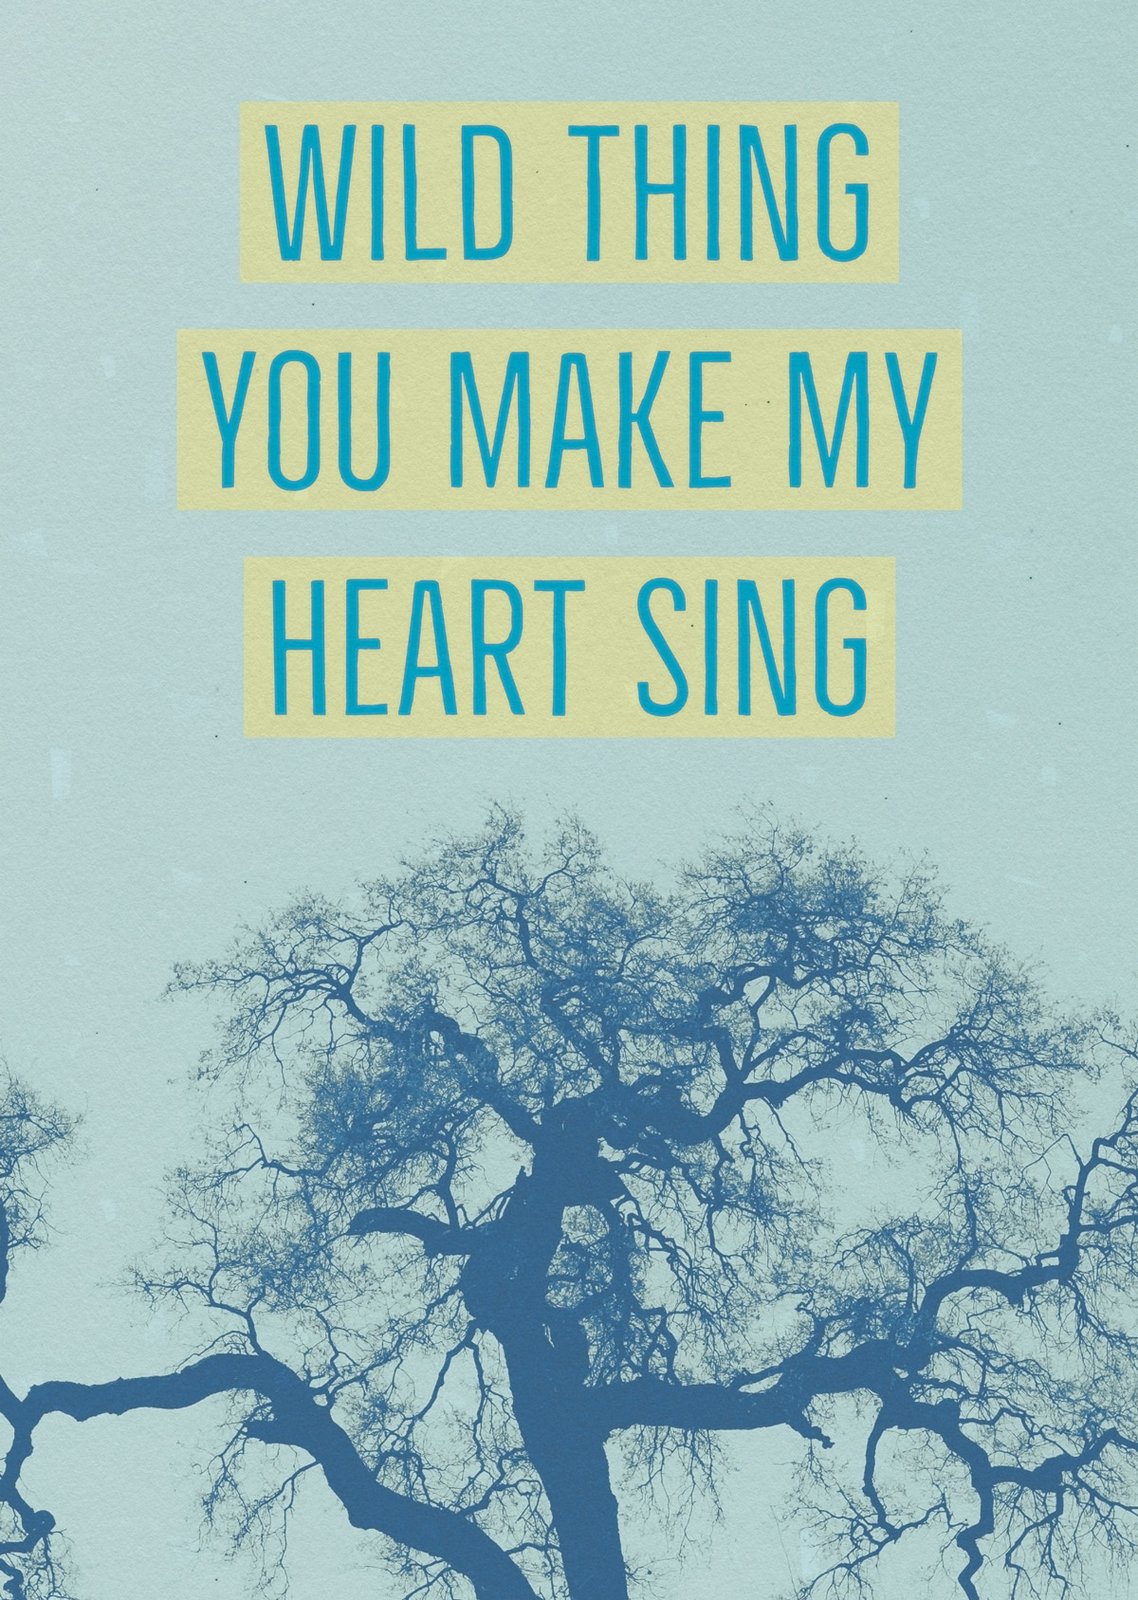 wild thing you make my heart sing youtube